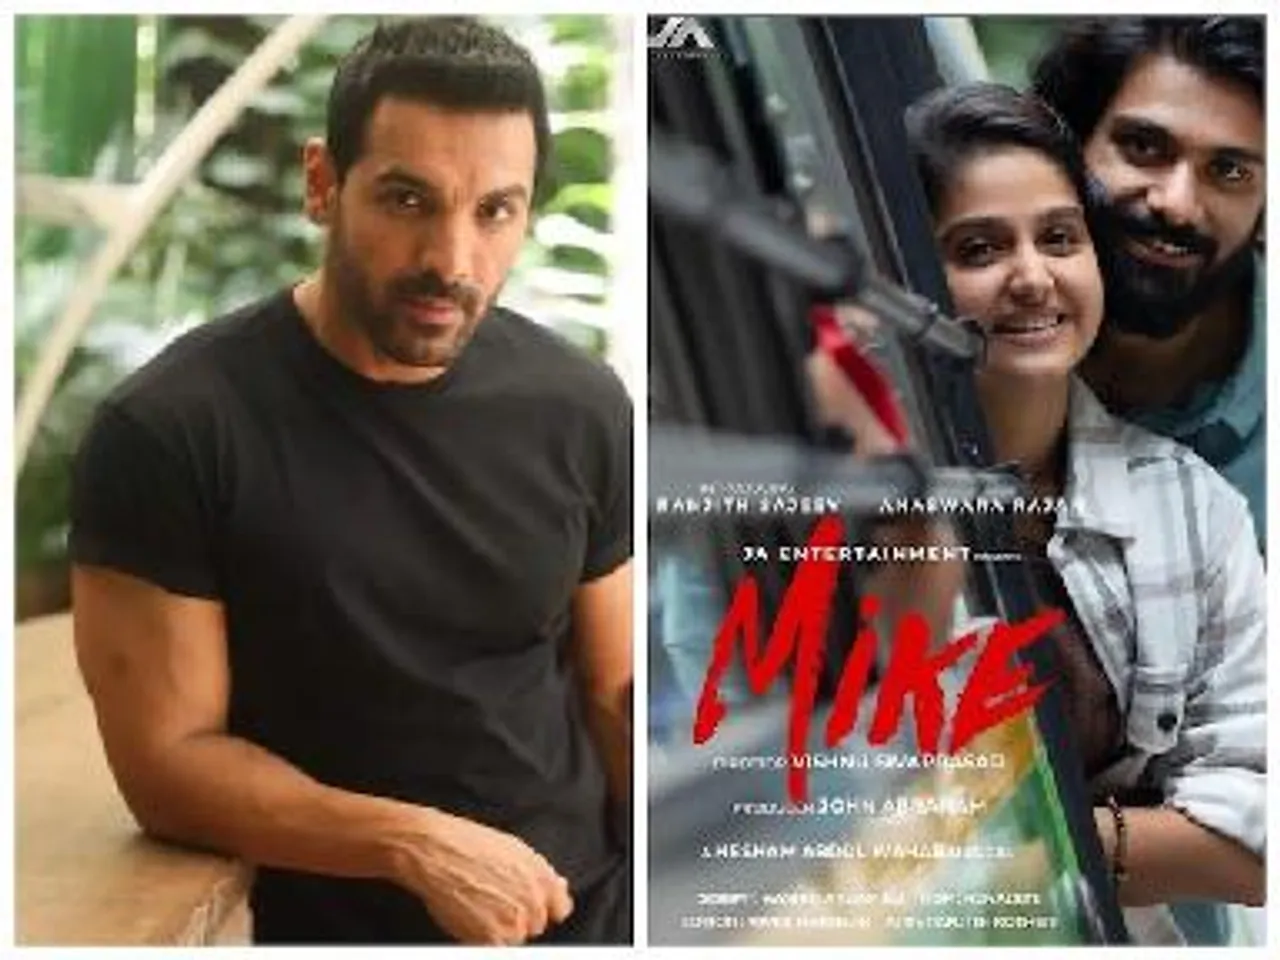 John Abraham Ventures Into Malayalam Cinema With Mike, Trailer Is Out